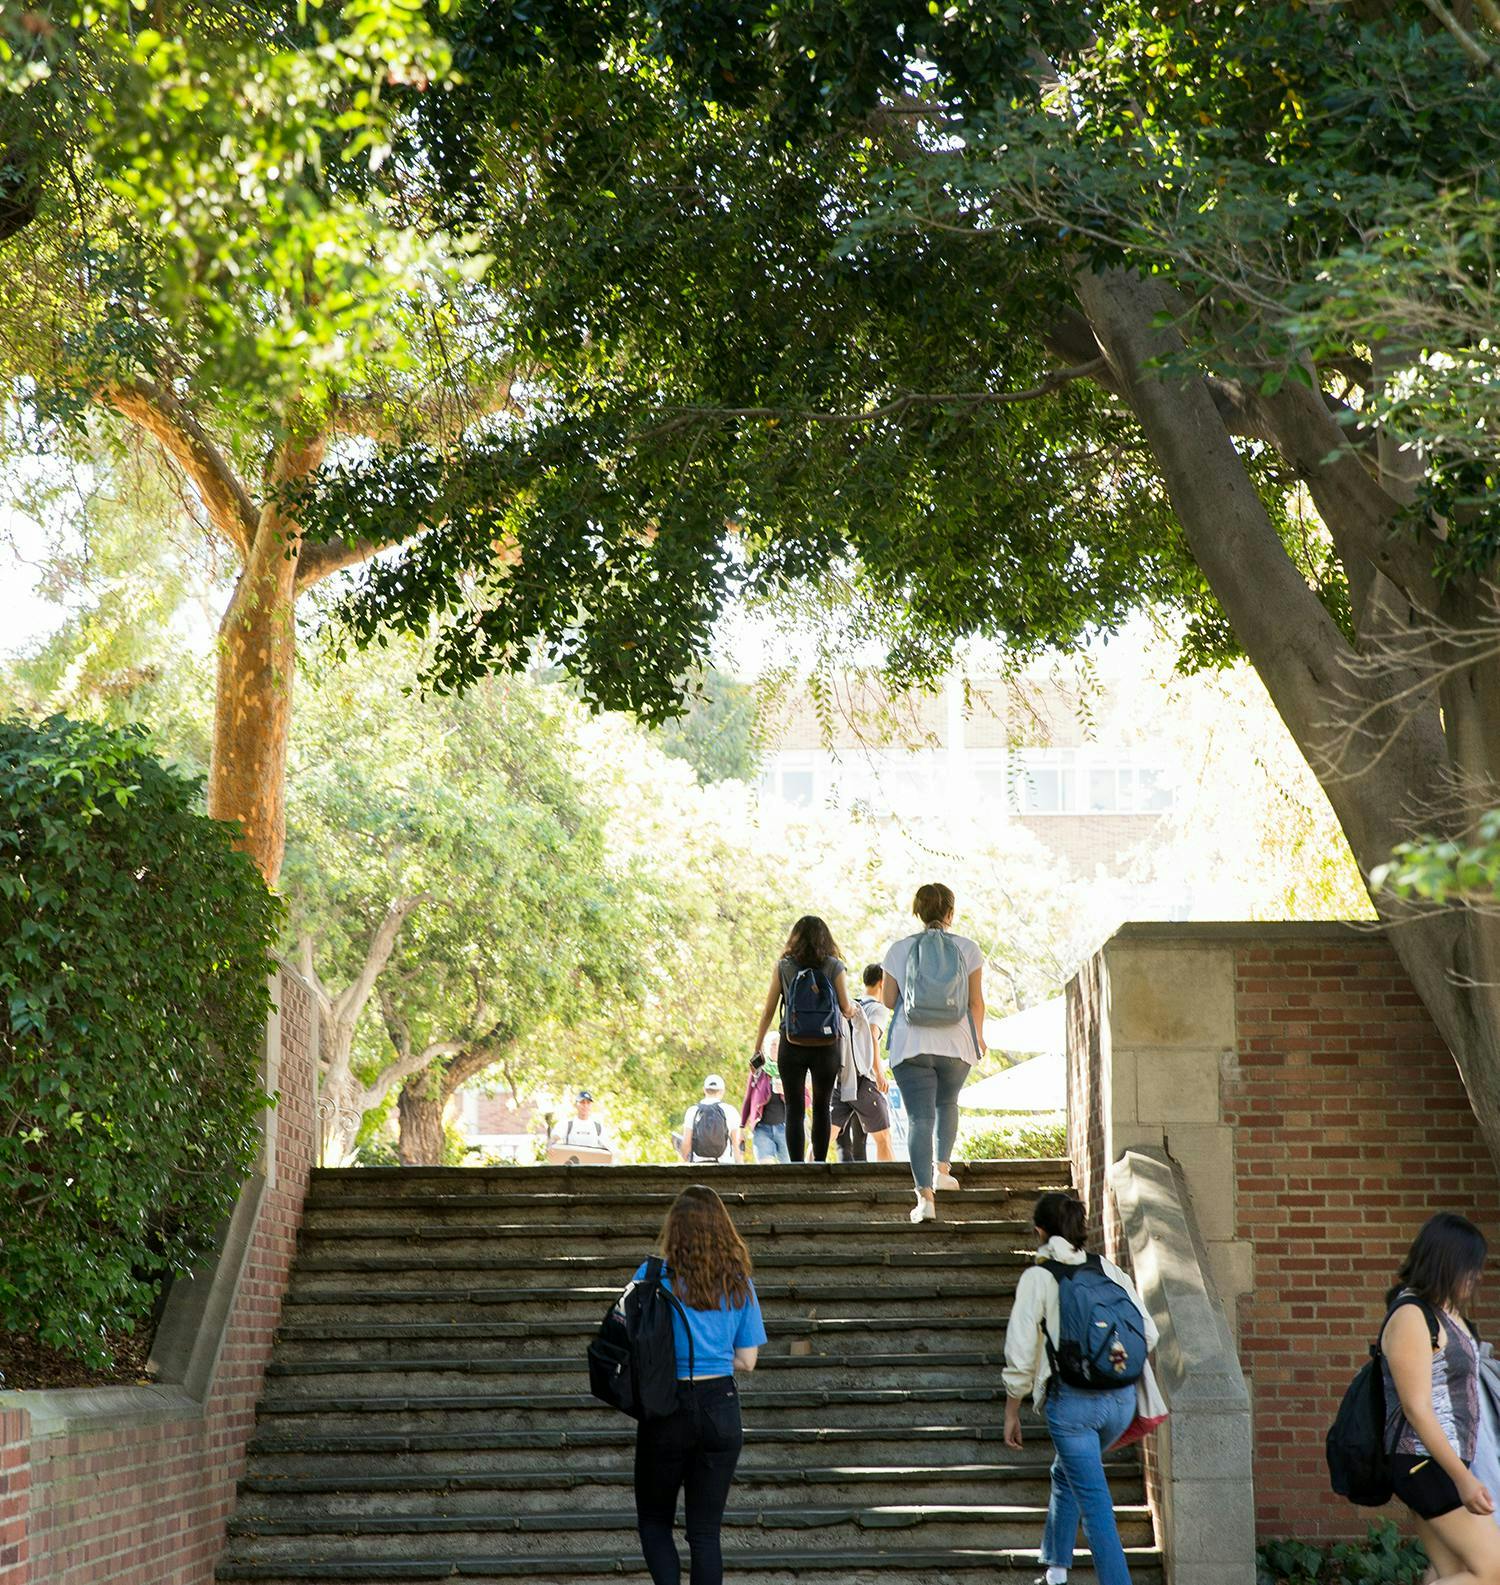 Students climbing a flight of stairs on campus